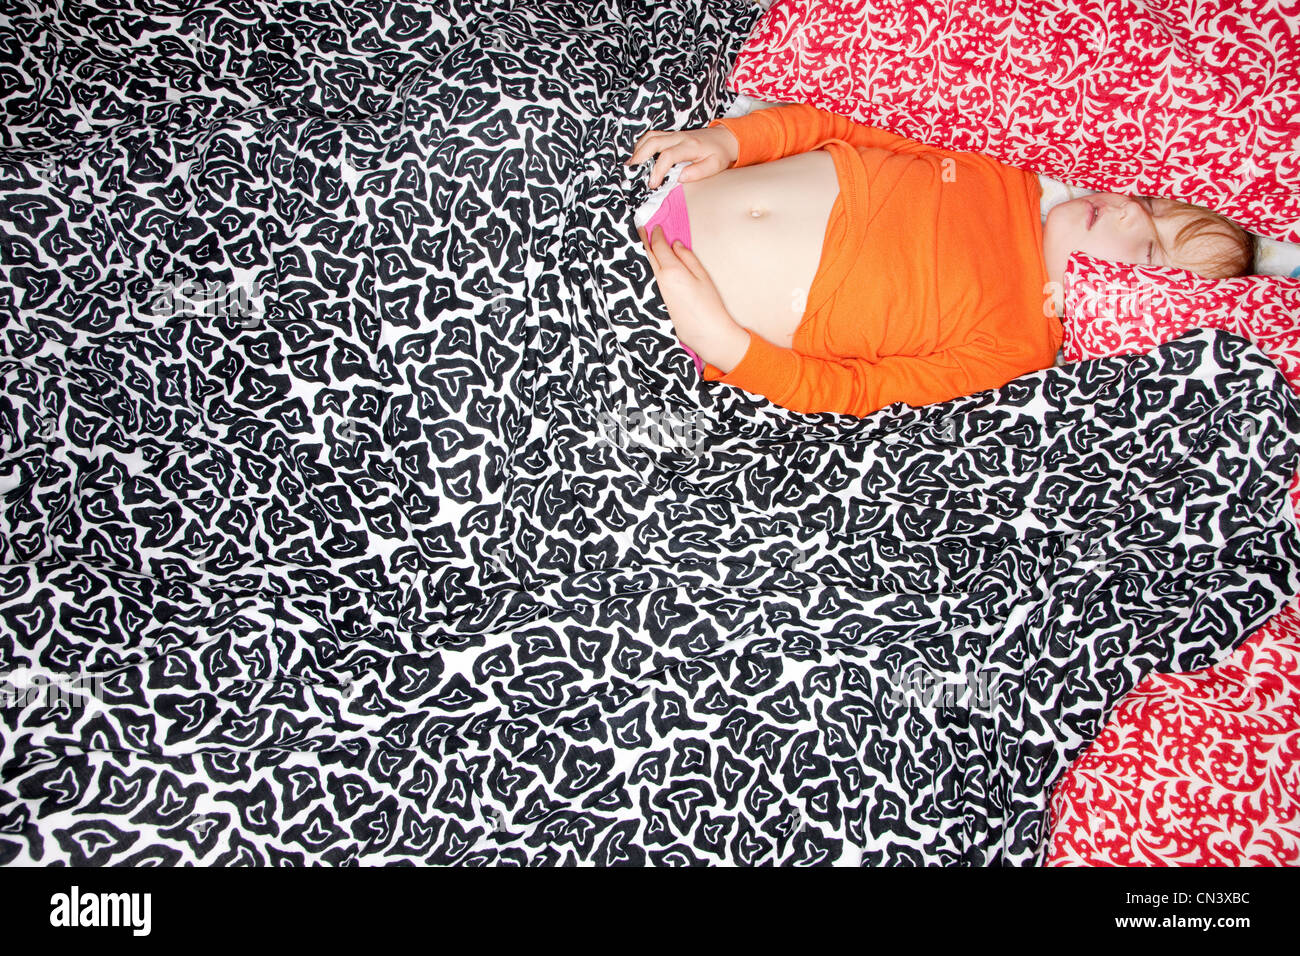 Girl sleeping in patterned sheets Stock Photo